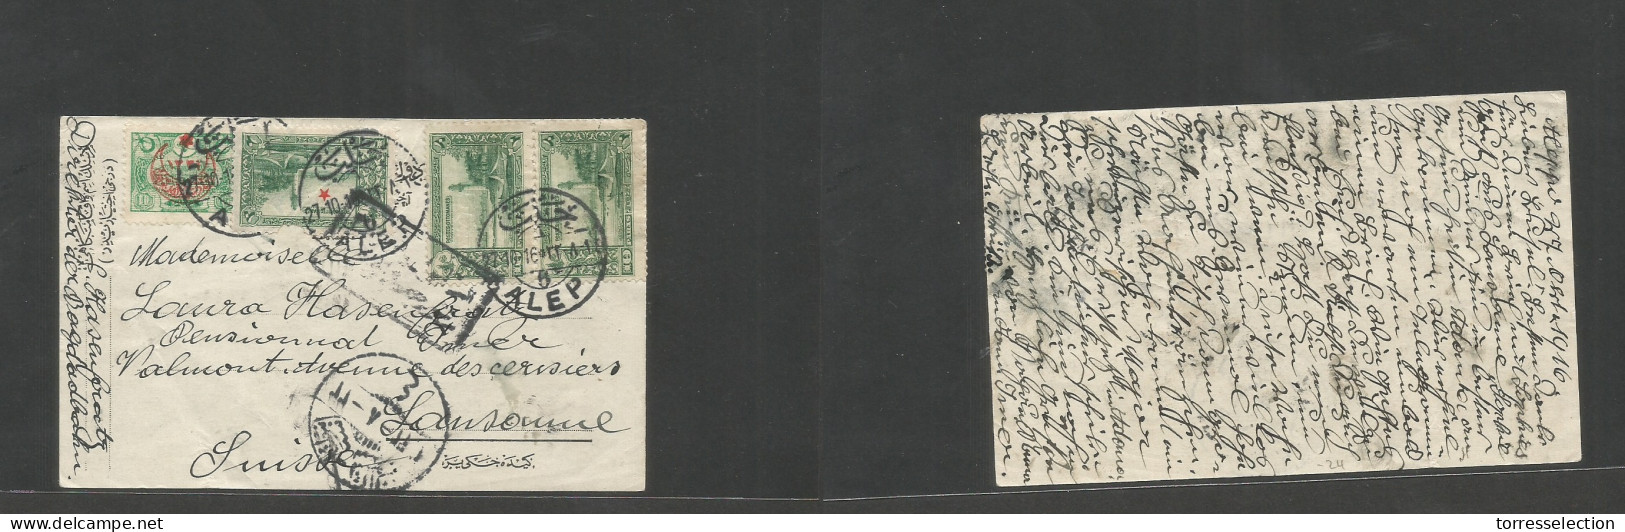 SYRIA. 1916 (27 Oct) Turkish PO, Alep - Switzerland, Lausanne. Multifkd Ppc At 40p Rate, Incl Ovptd Issue, Tied Bilingua - Syria